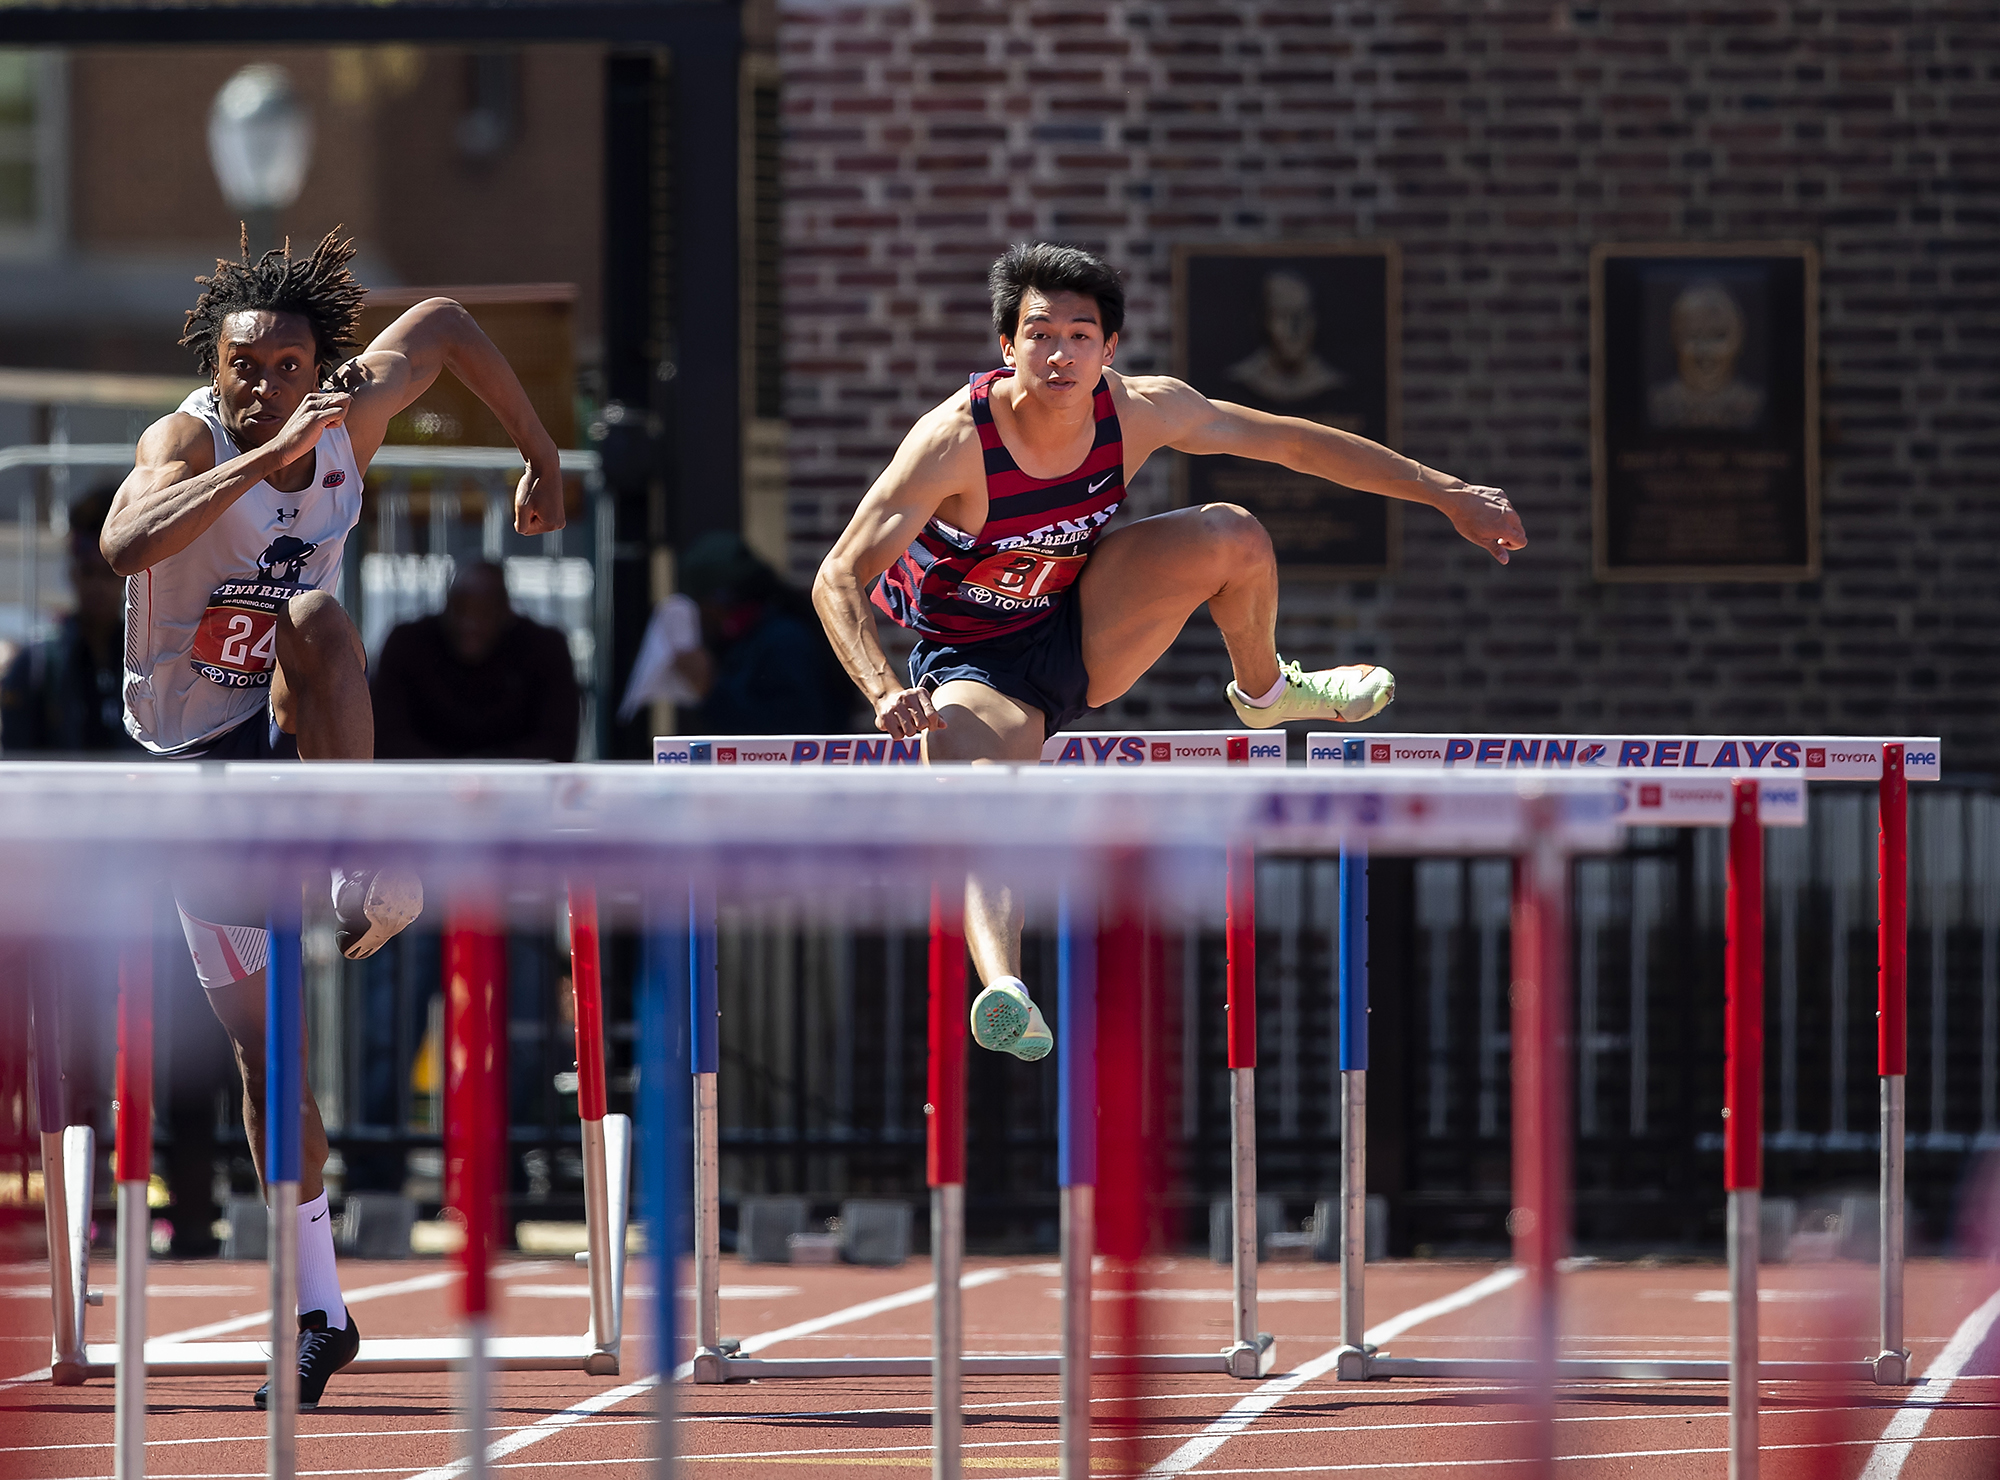 Two racers running and jumping over hurdles.